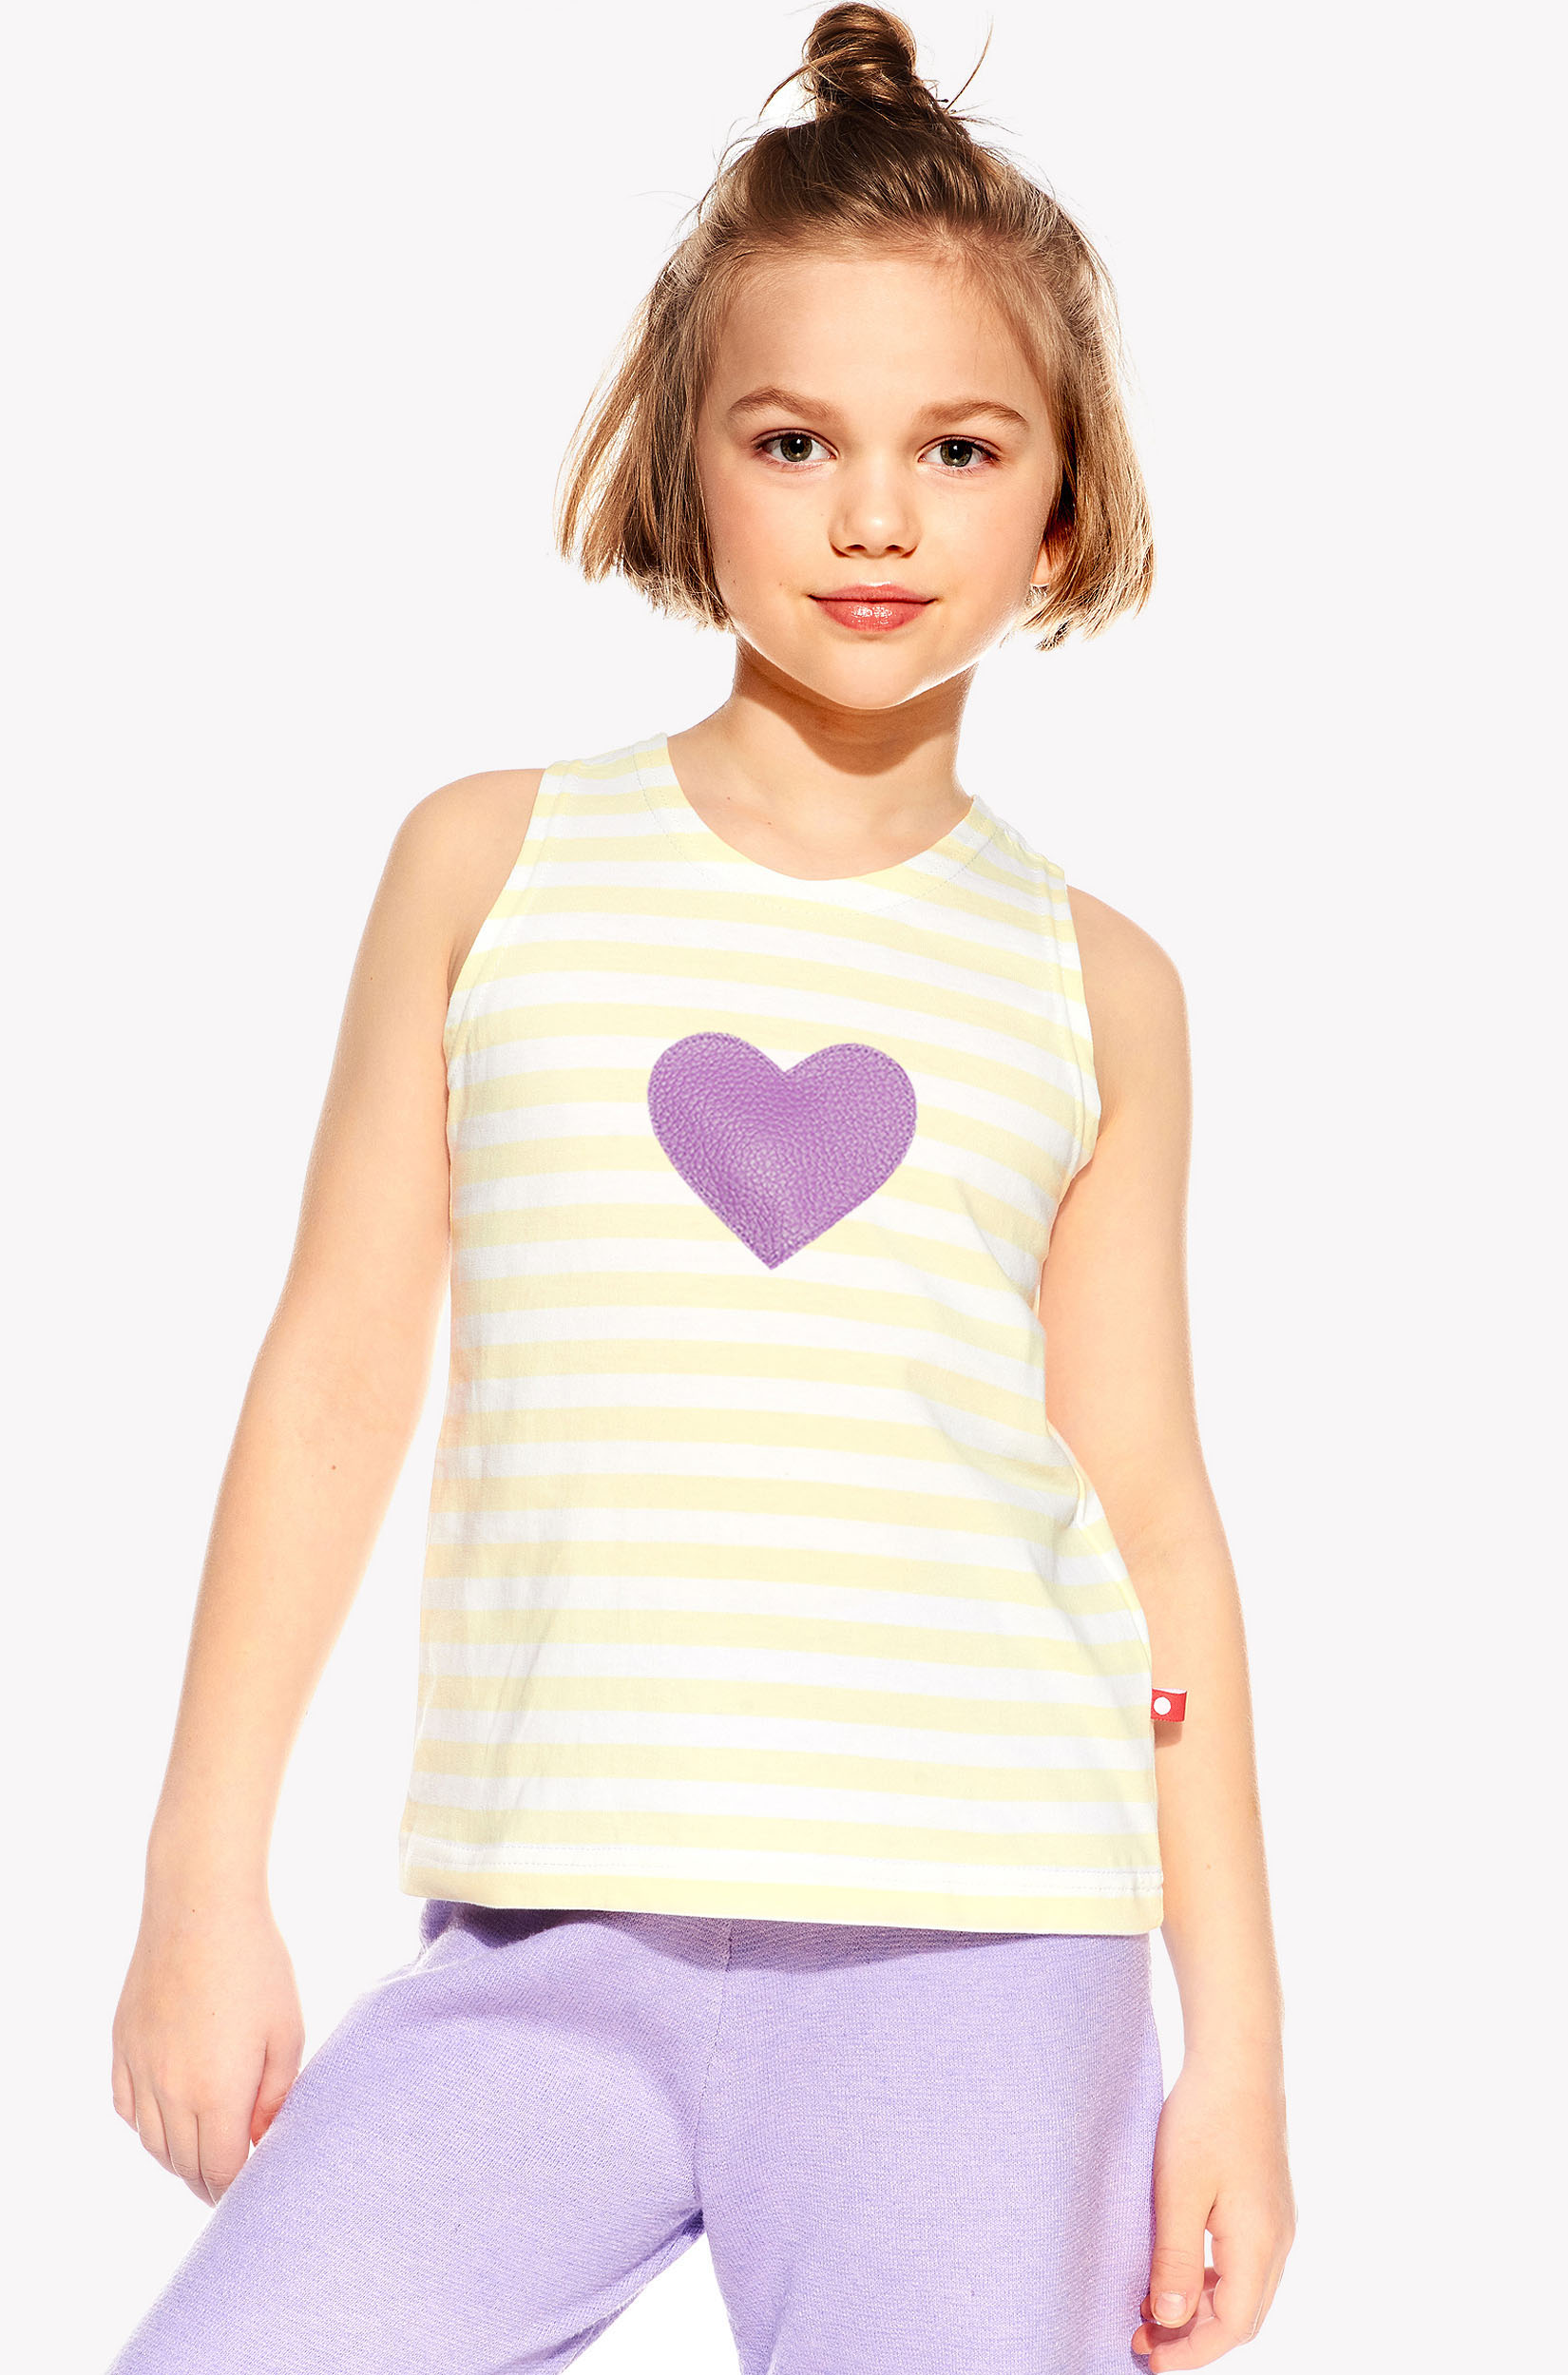 Singlet with heart